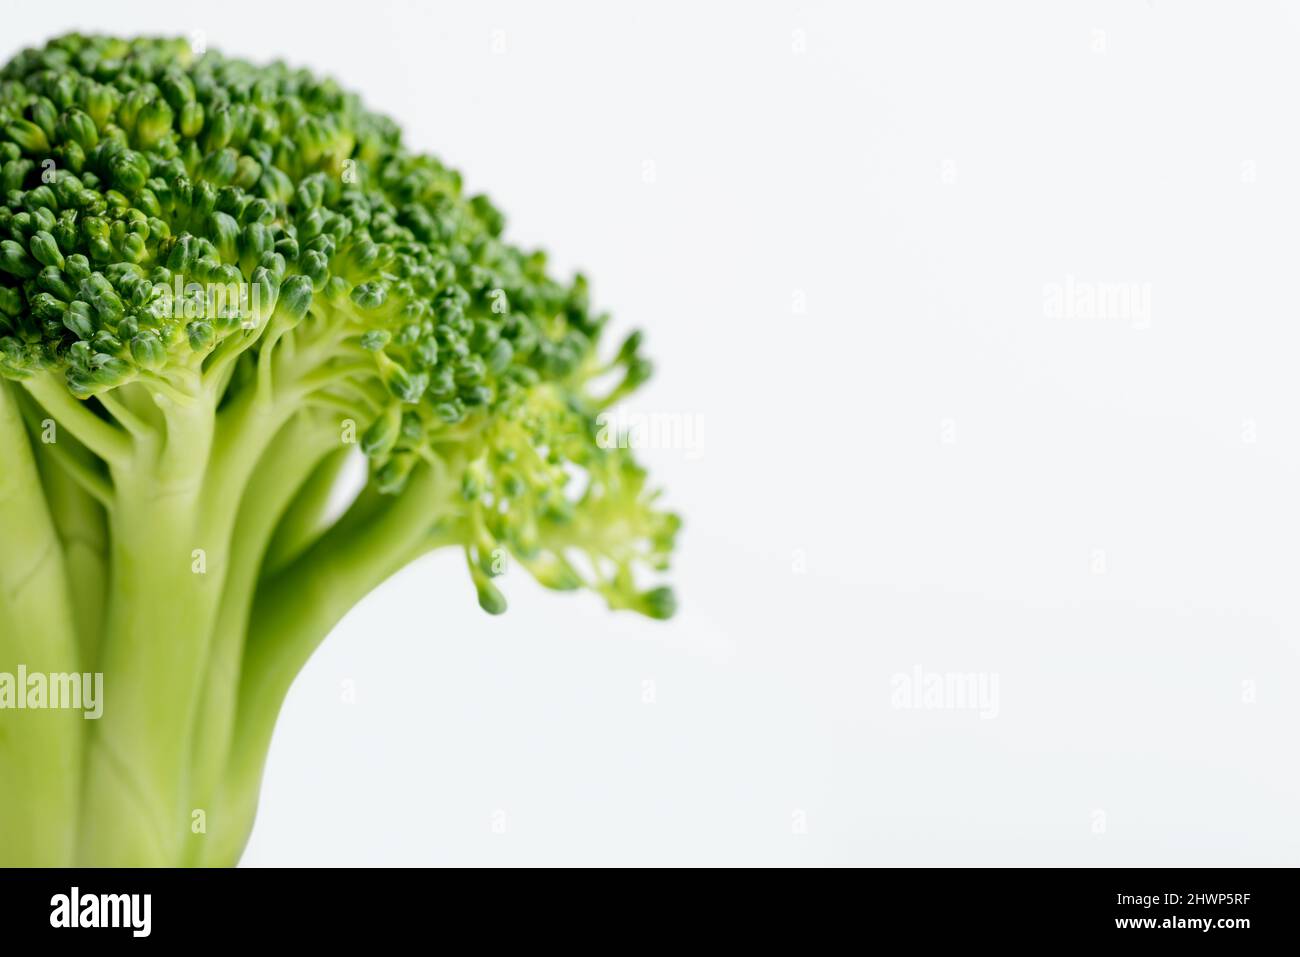 Close up shot of a sliced raw broccoli on a white background. Stock Photo